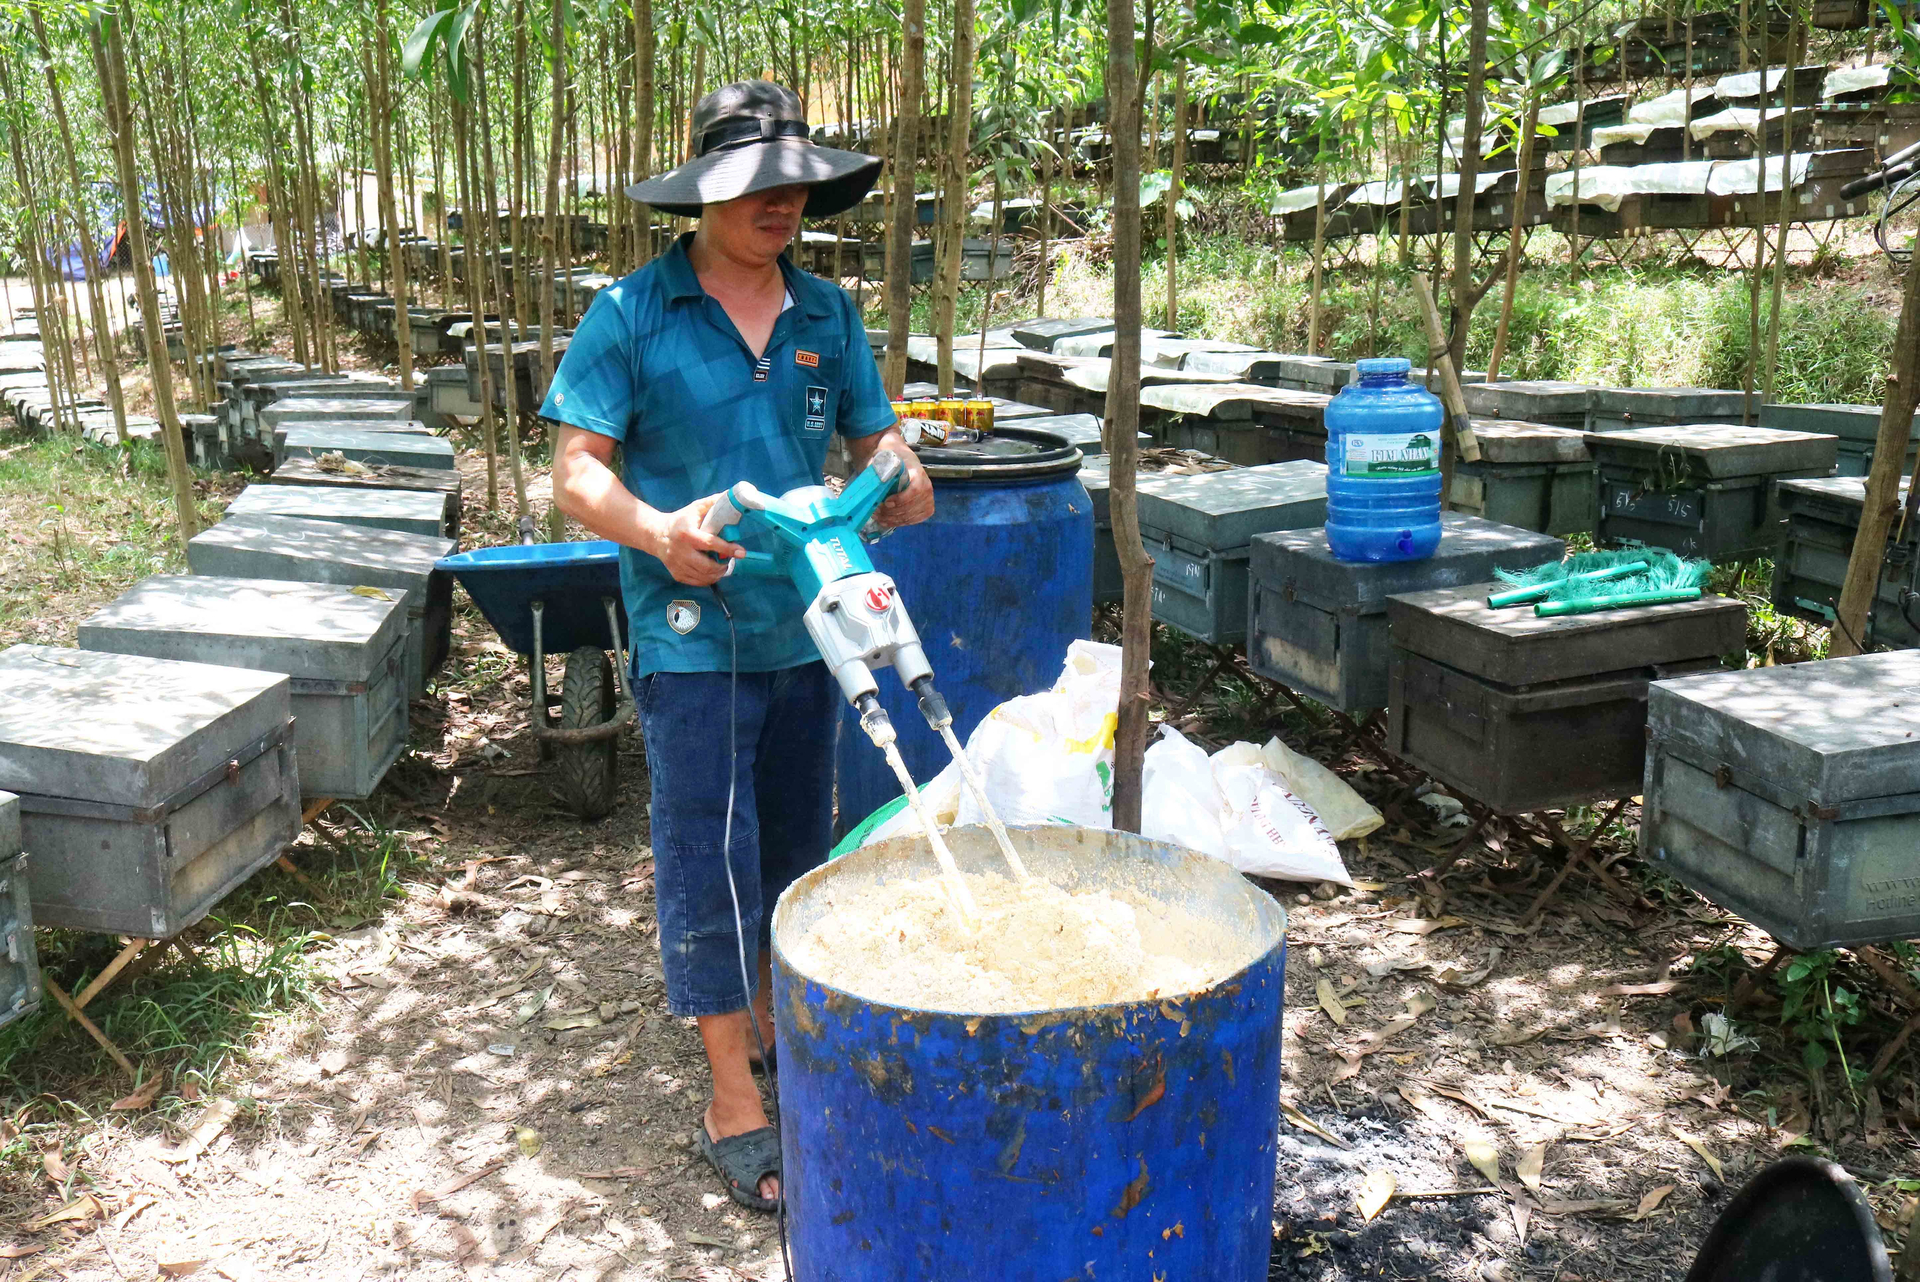 The price of honey is too low, while the costs of investment, bee care, and transportation are high, causing many bee farms to quit or suffer losses. Photo: Huy Thu.